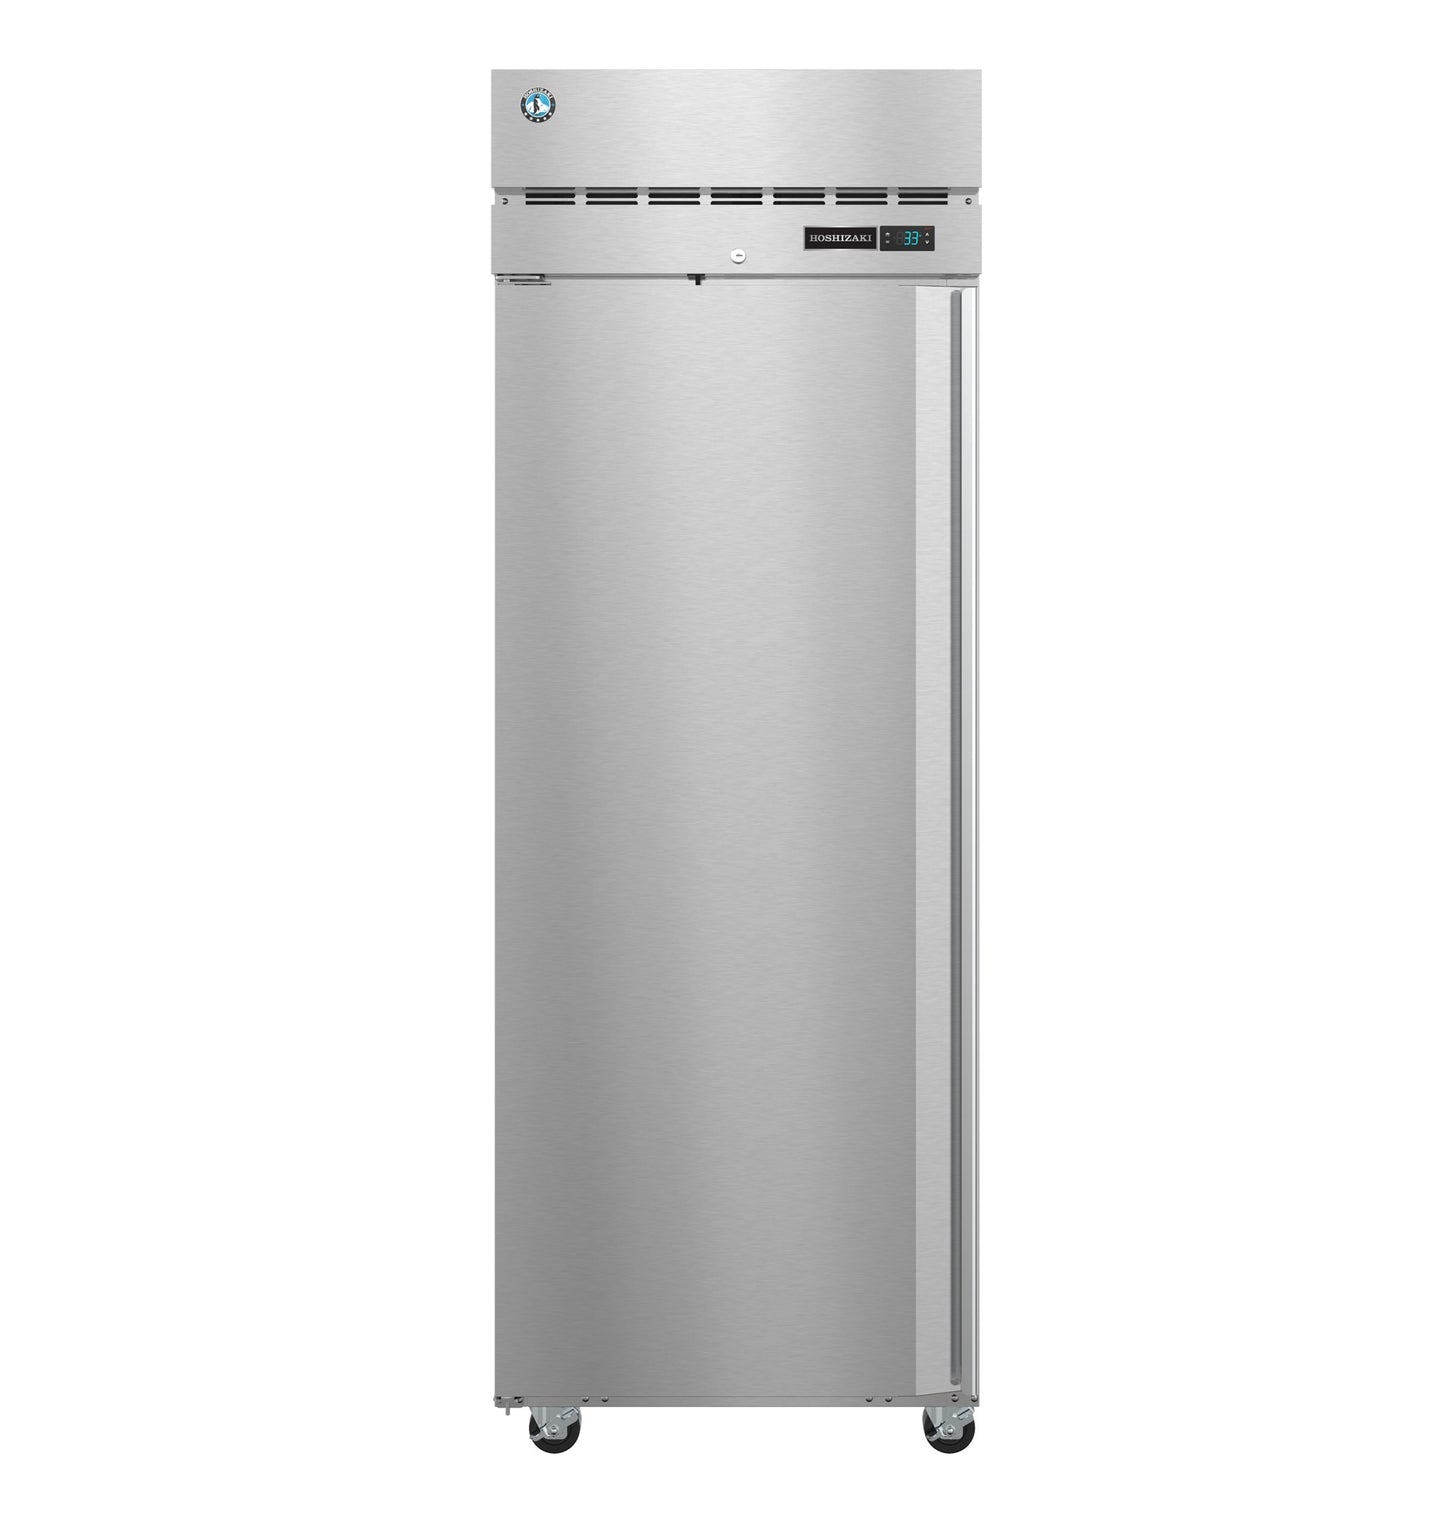 F1A-FSL, Freezer, Single Section Upright, Full Stainless Door with Lock